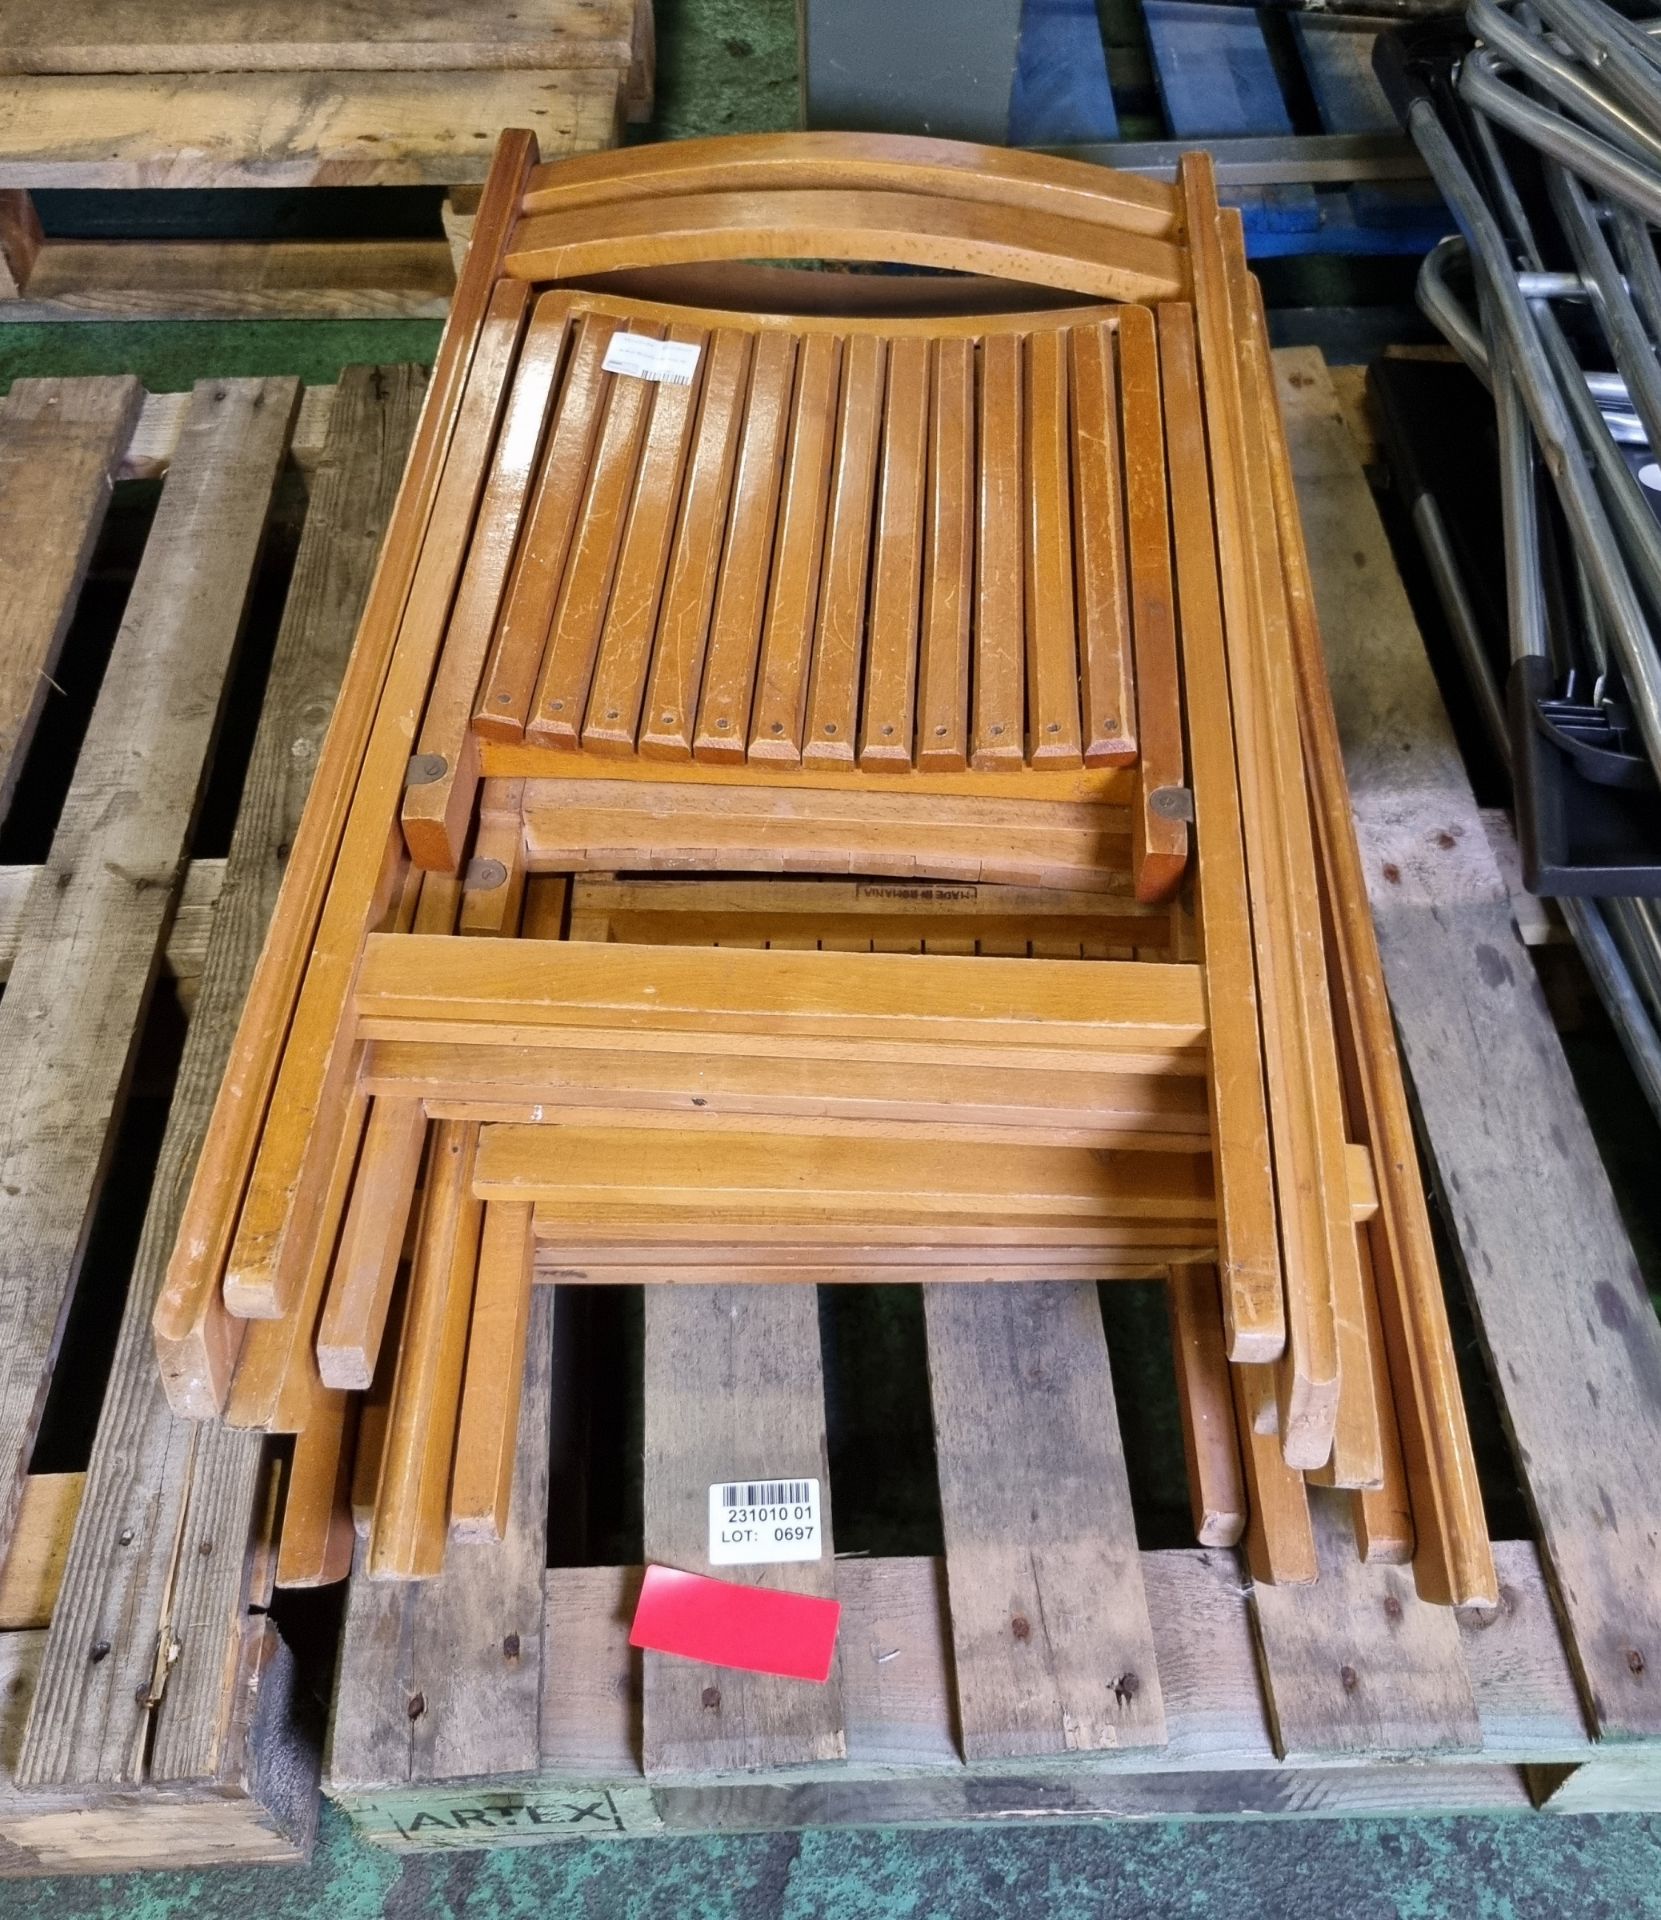 4x Wooden folding chairs